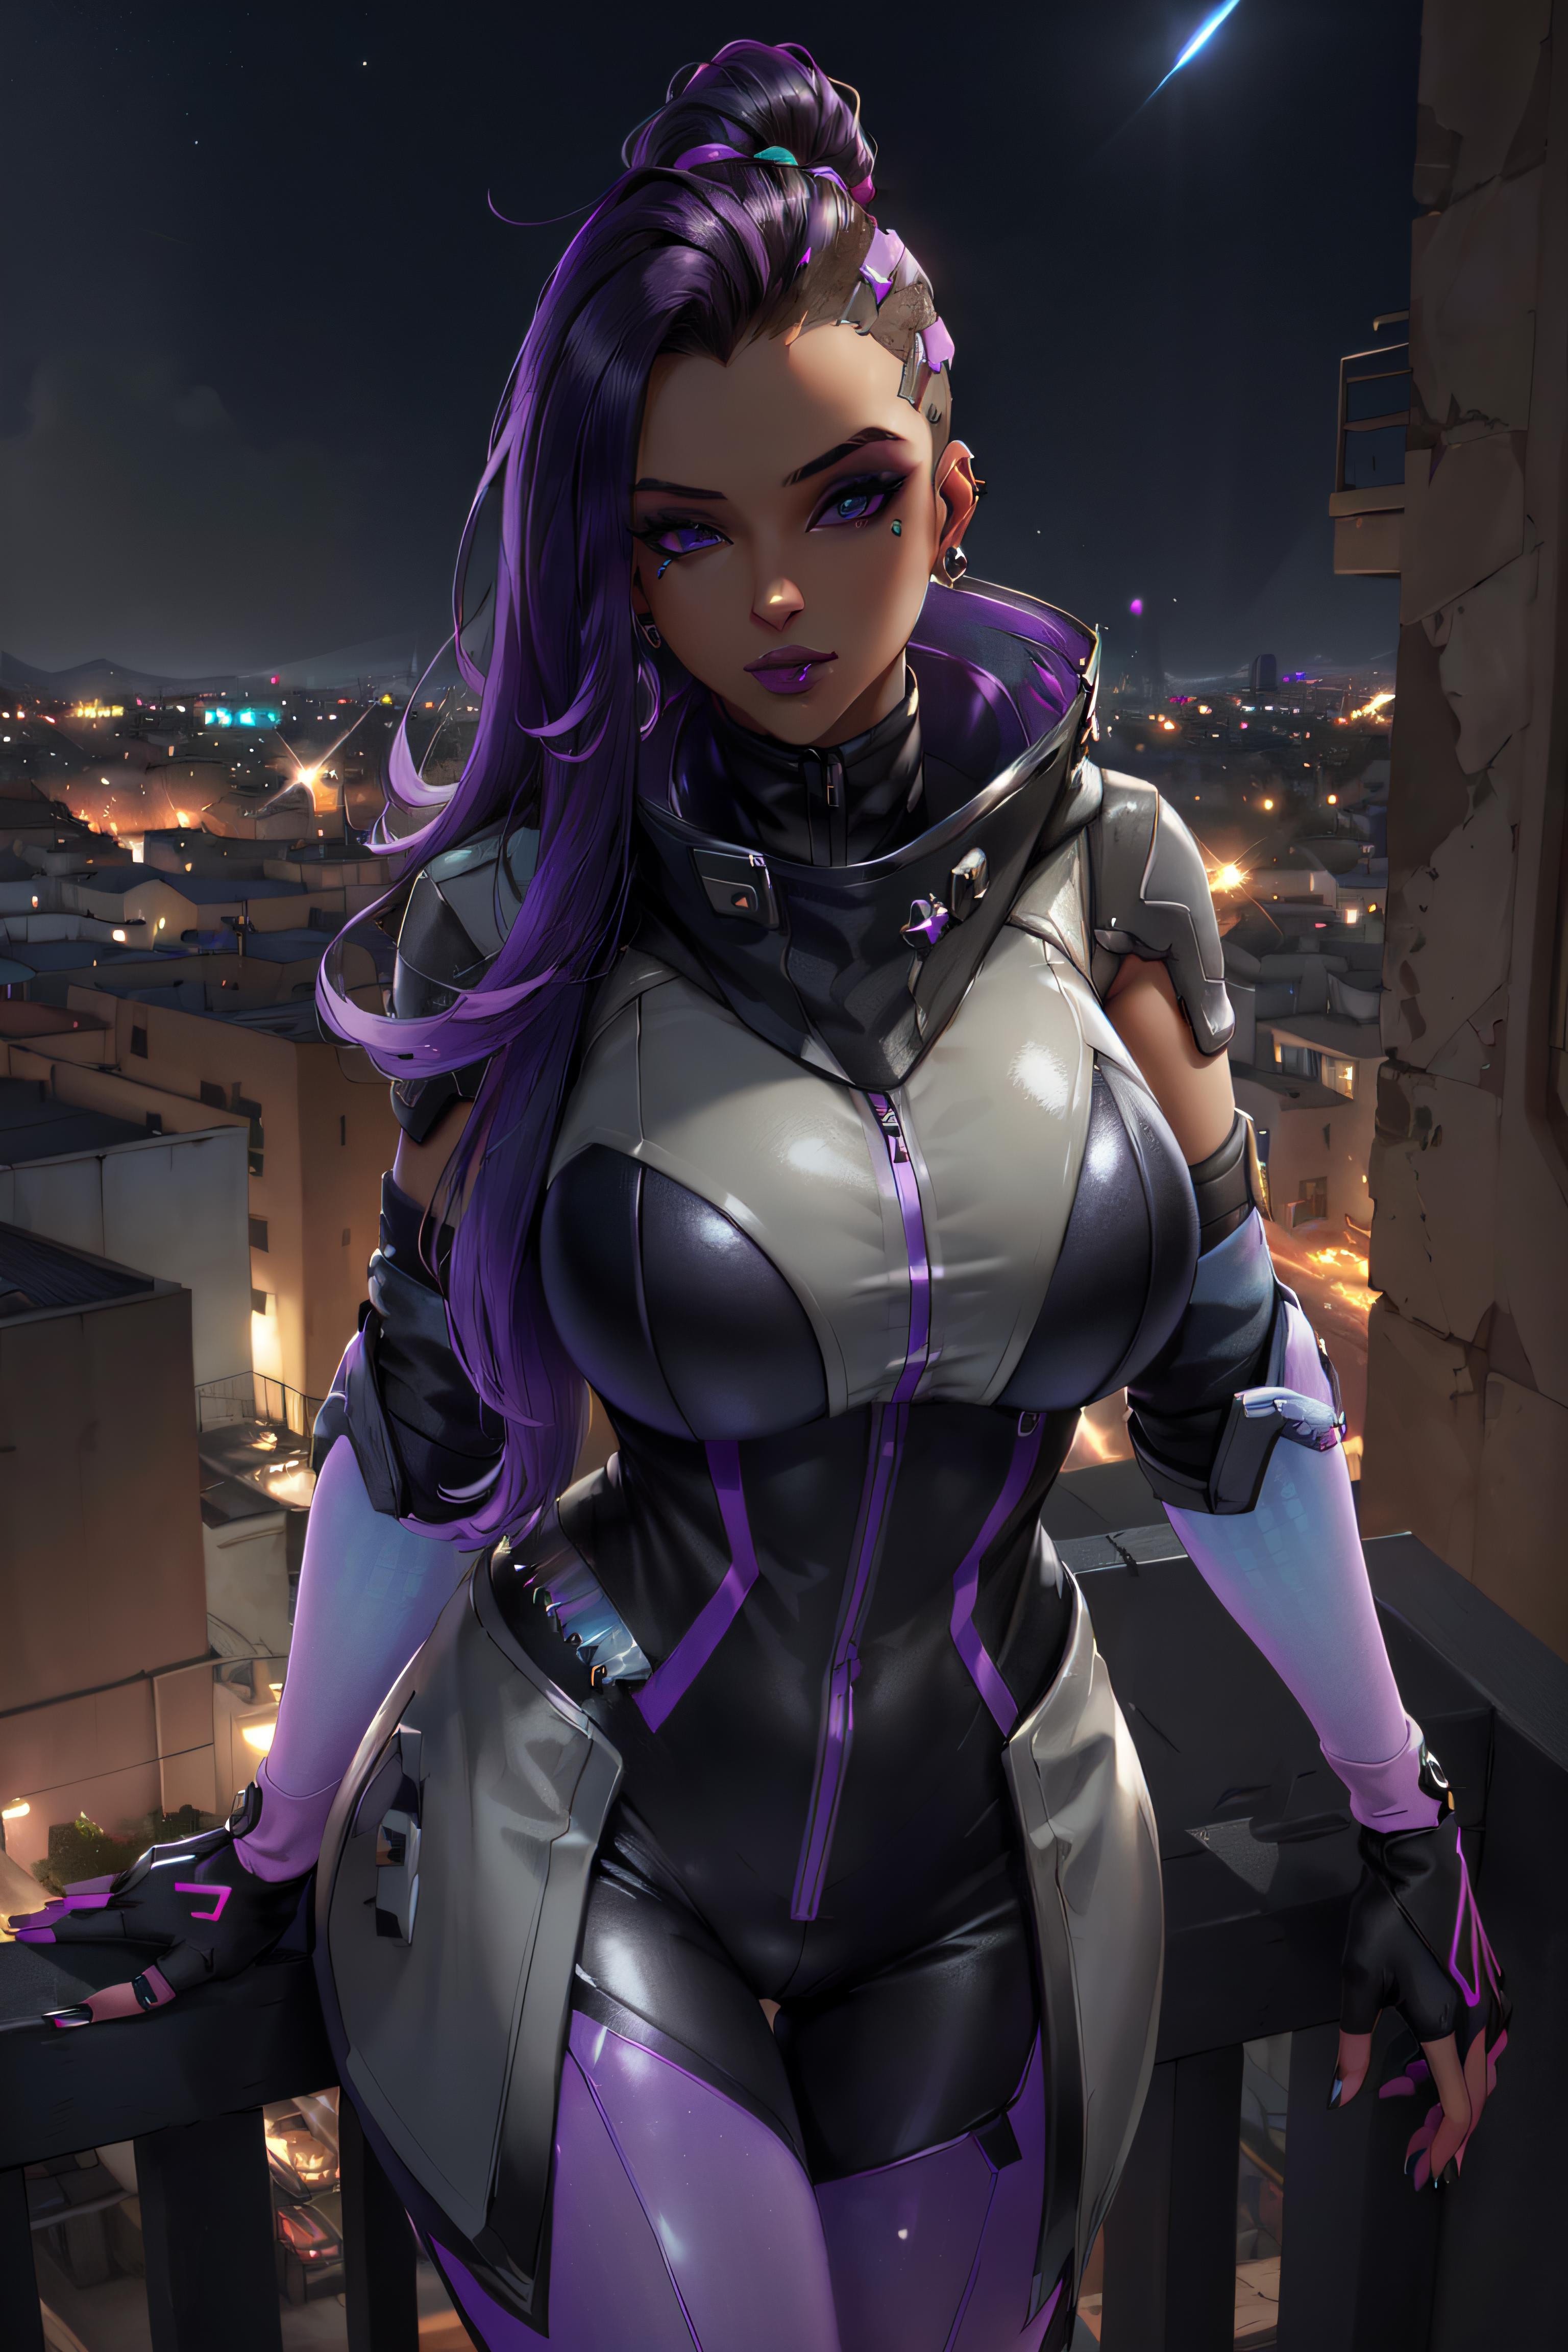 Not so Perfect - Sombra from Overwatch image by betweenspectrums